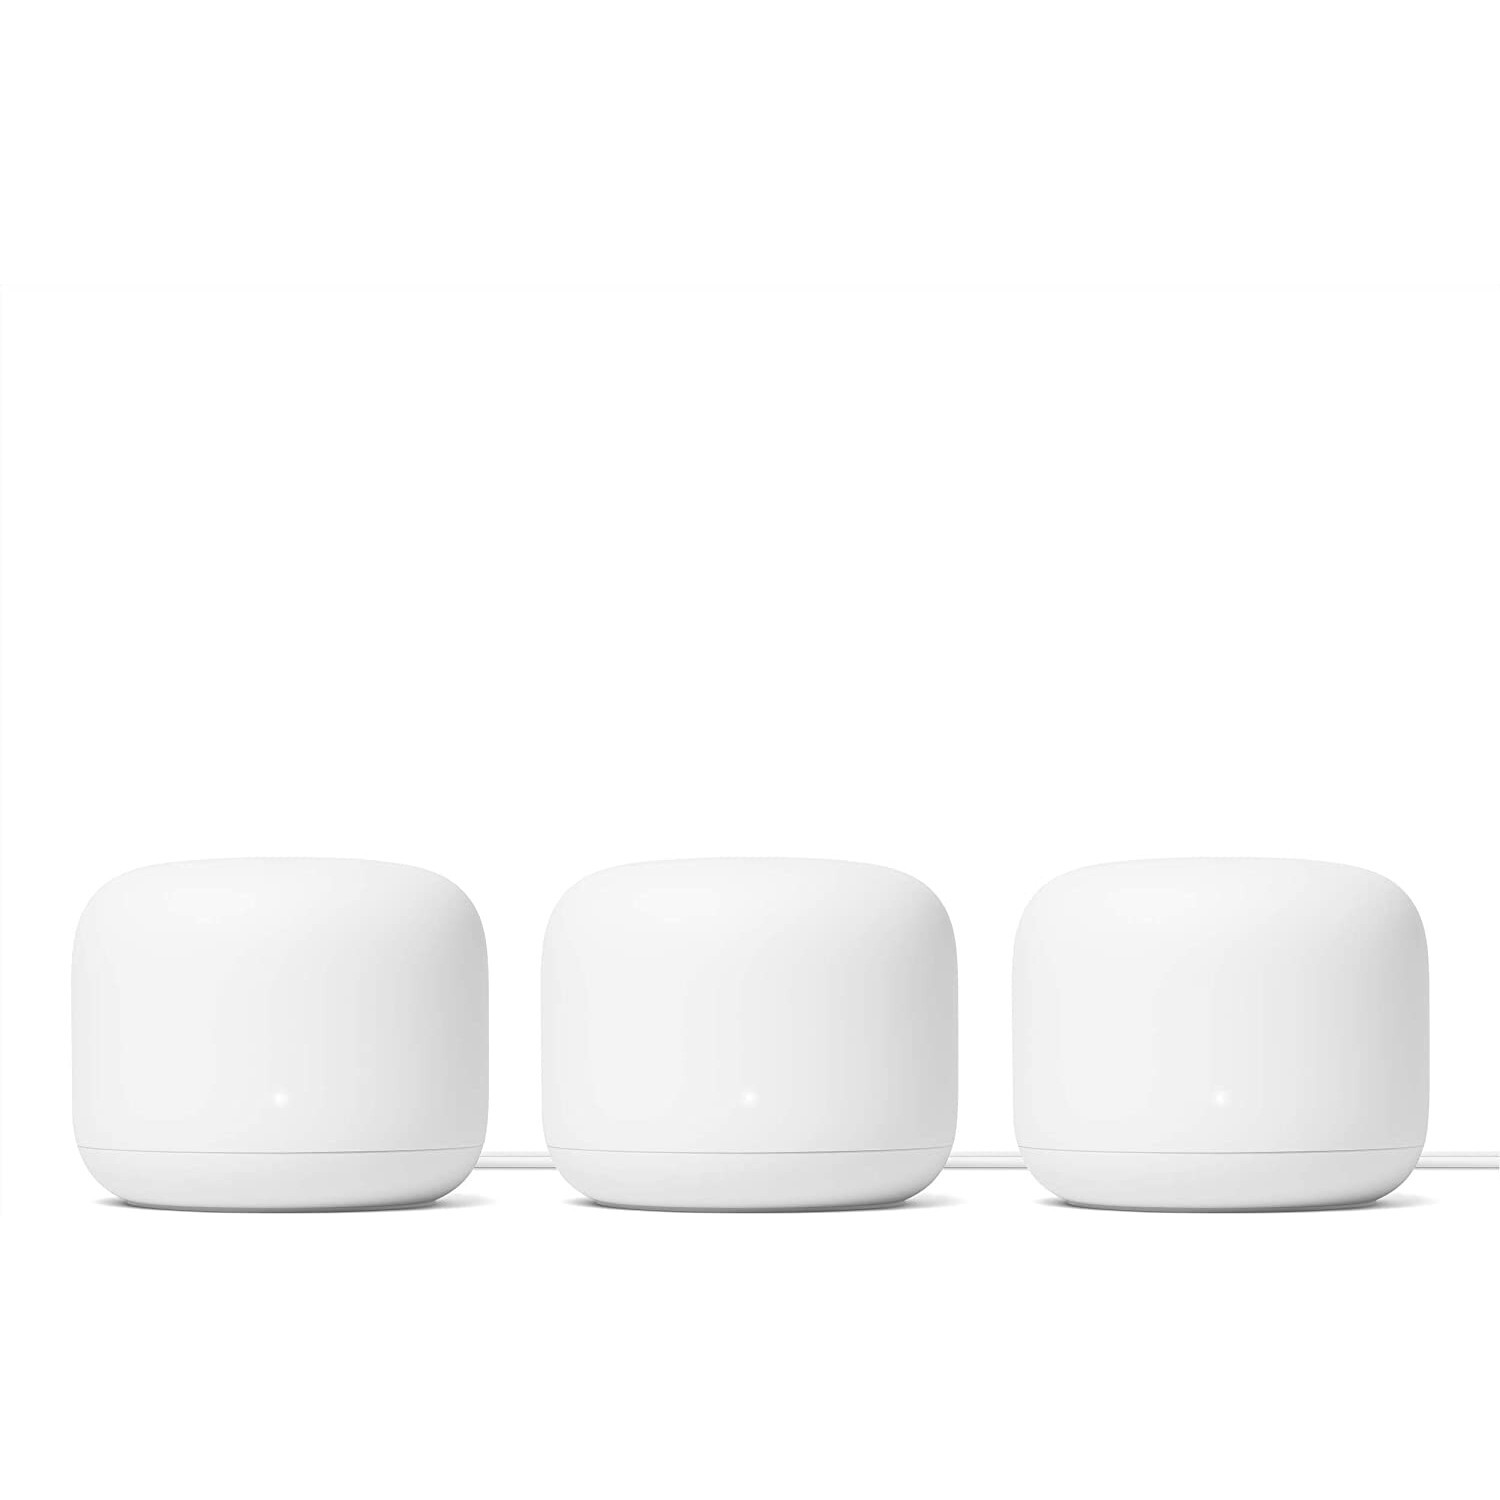 Router - Bộ phát wifi Google Nest Wifi 3 pack (1 Router + 2 Point)